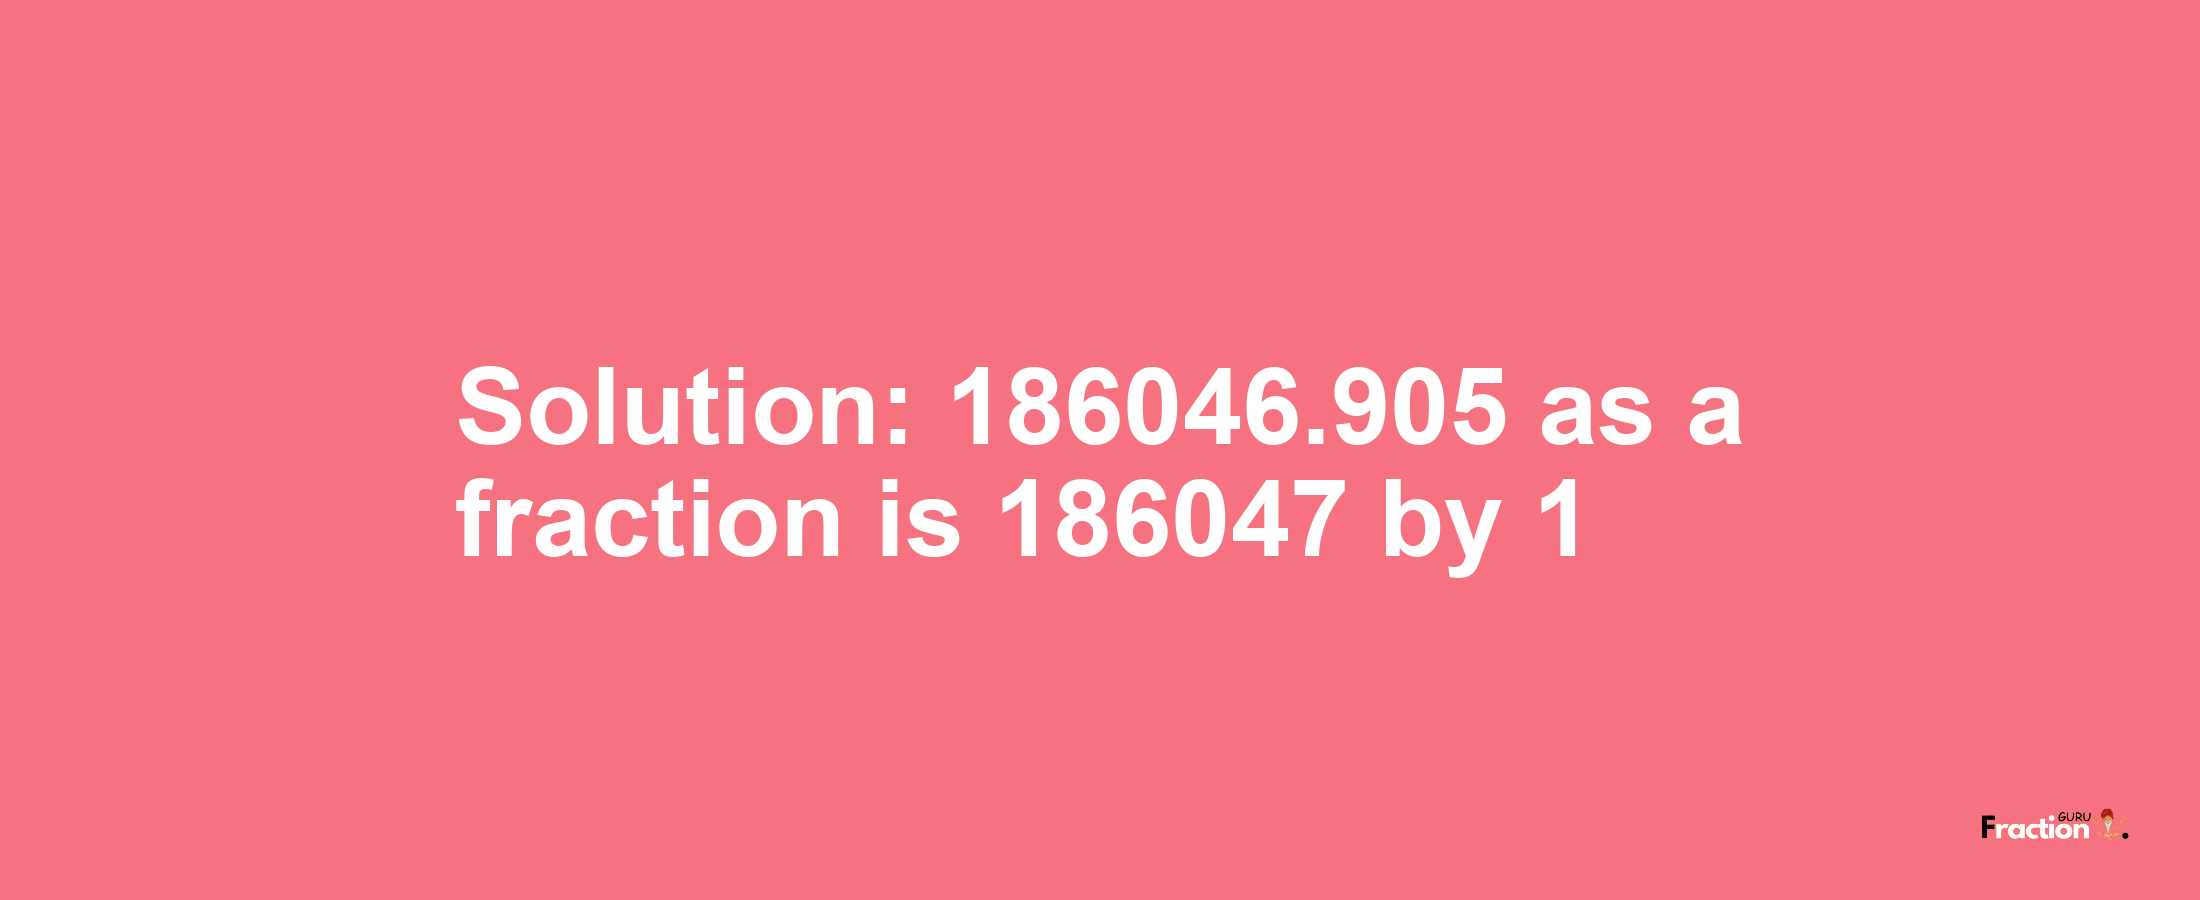 Solution:186046.905 as a fraction is 186047/1